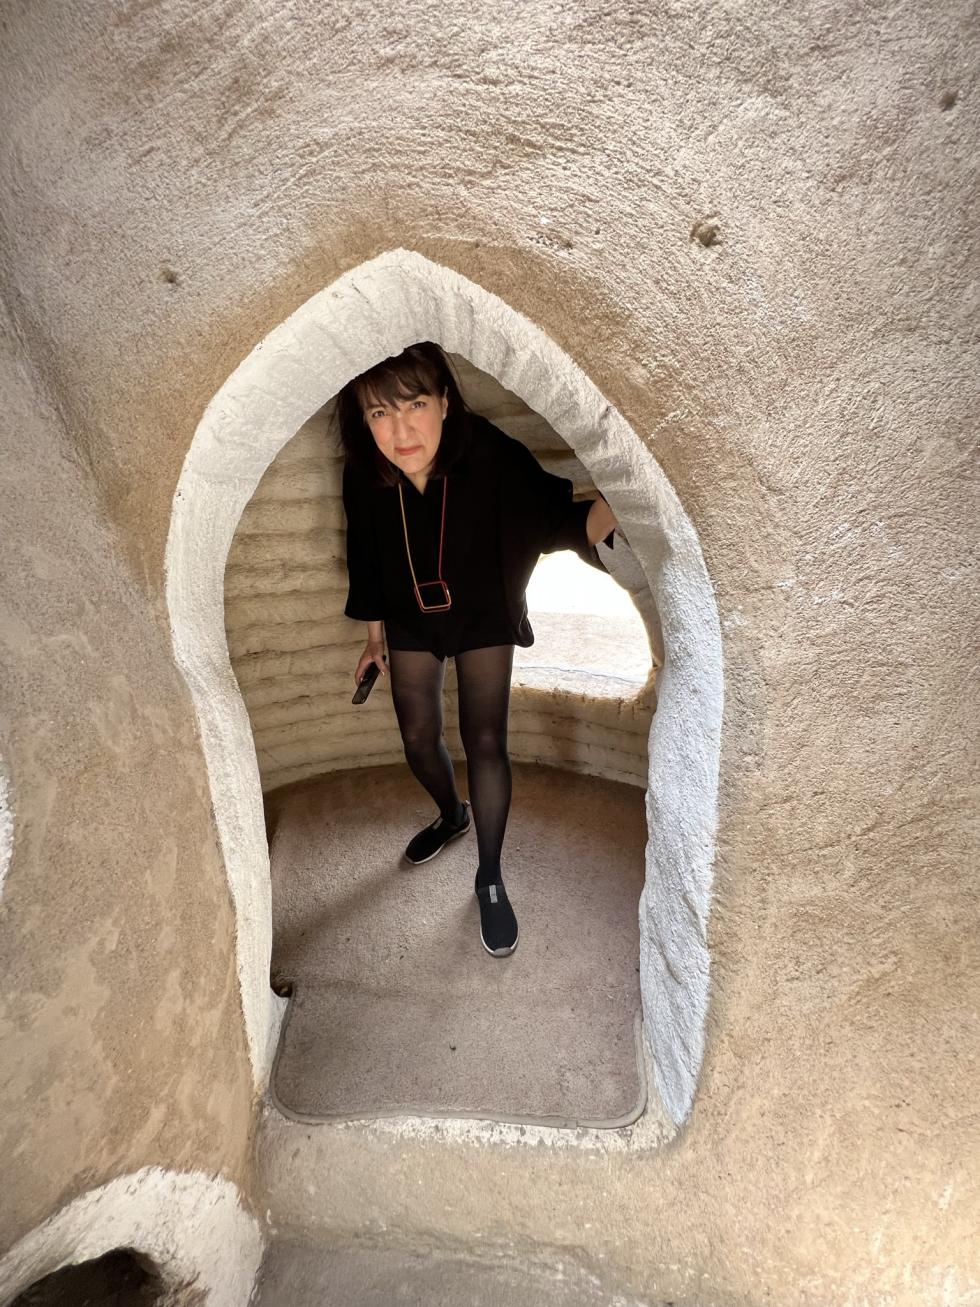 A woman dressed in all black ducking down as she walks through a tunnel.